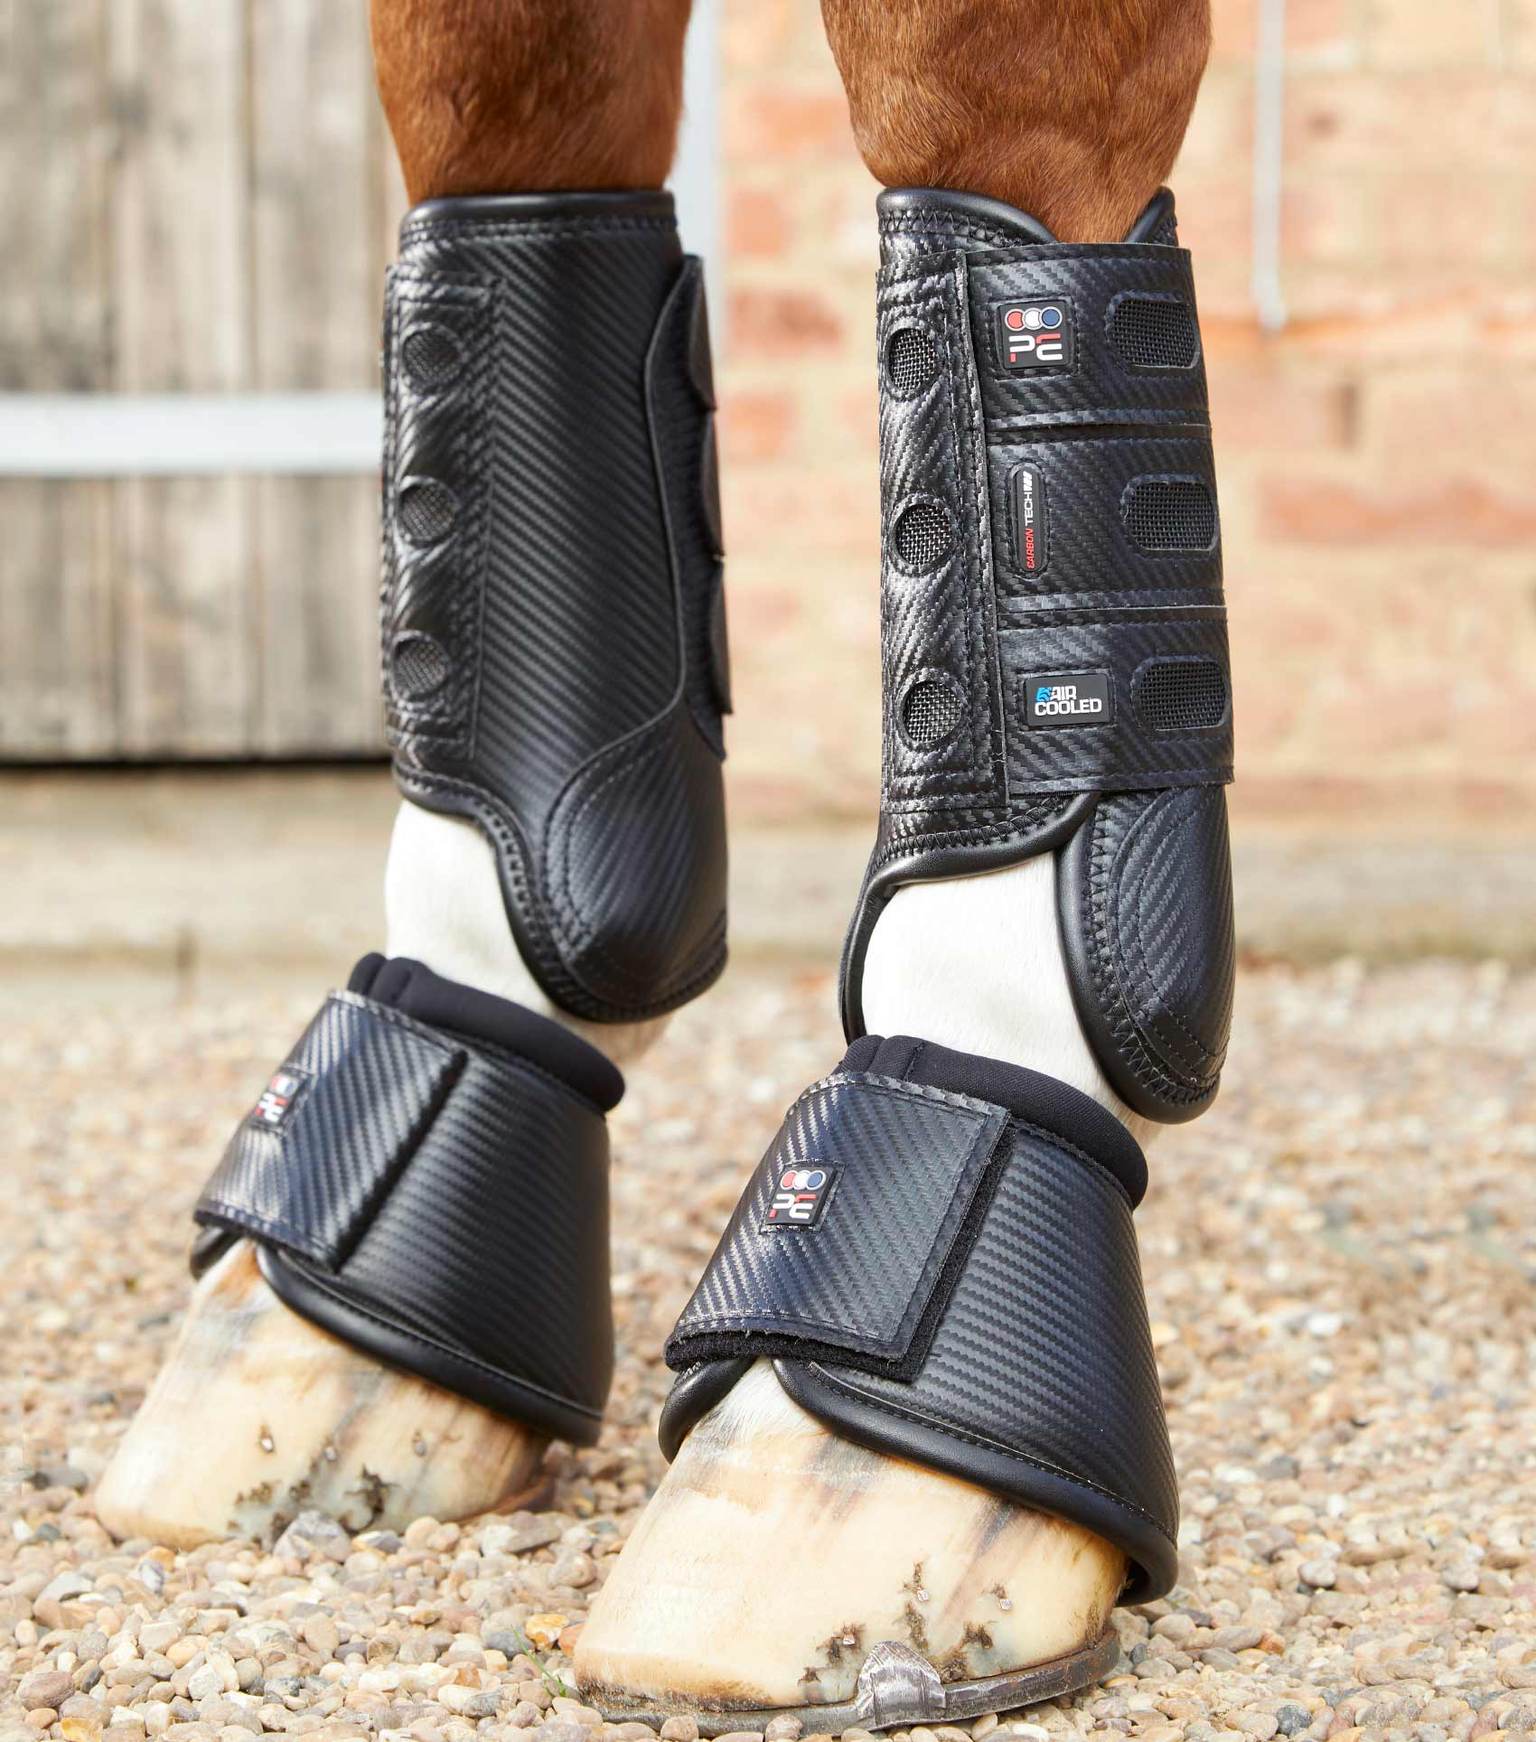 pei cross country boots-pei eventing boots